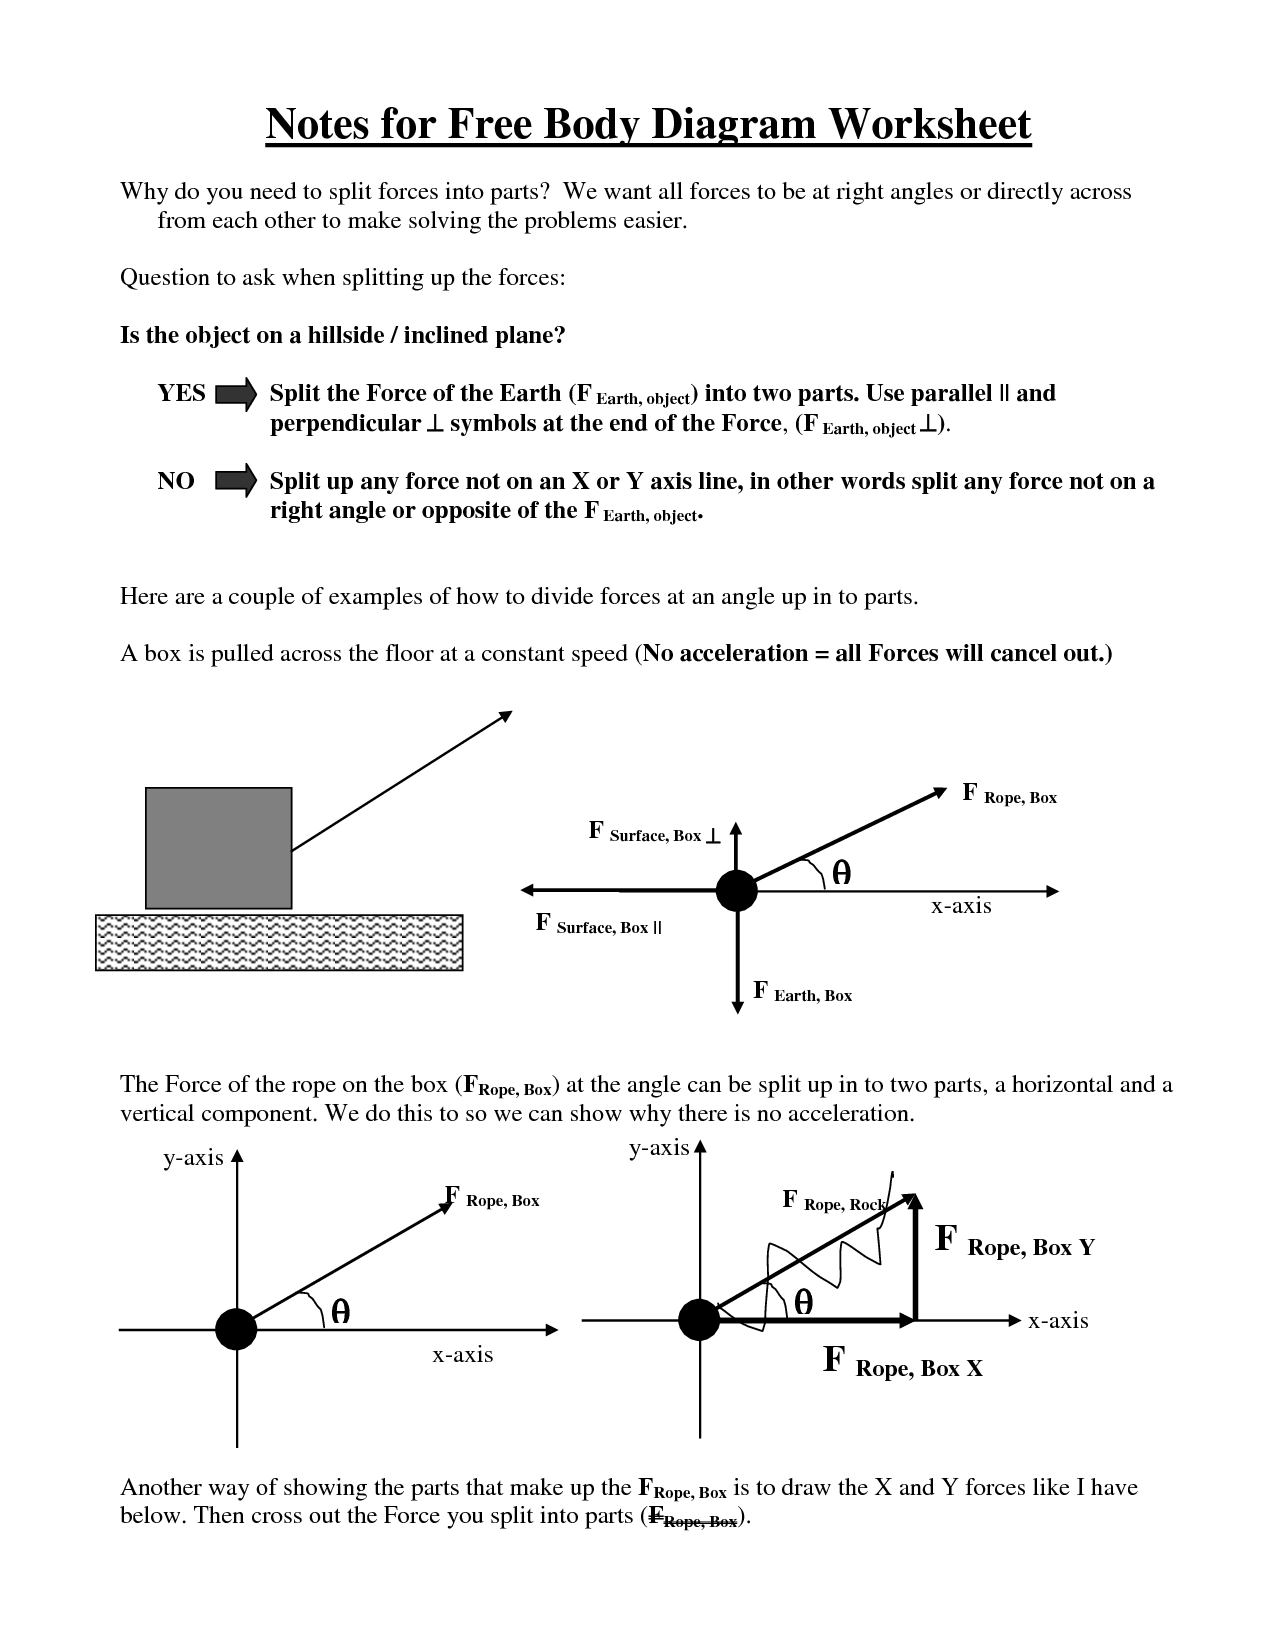 Free-Body Diagrams Worksheet with Answers Image